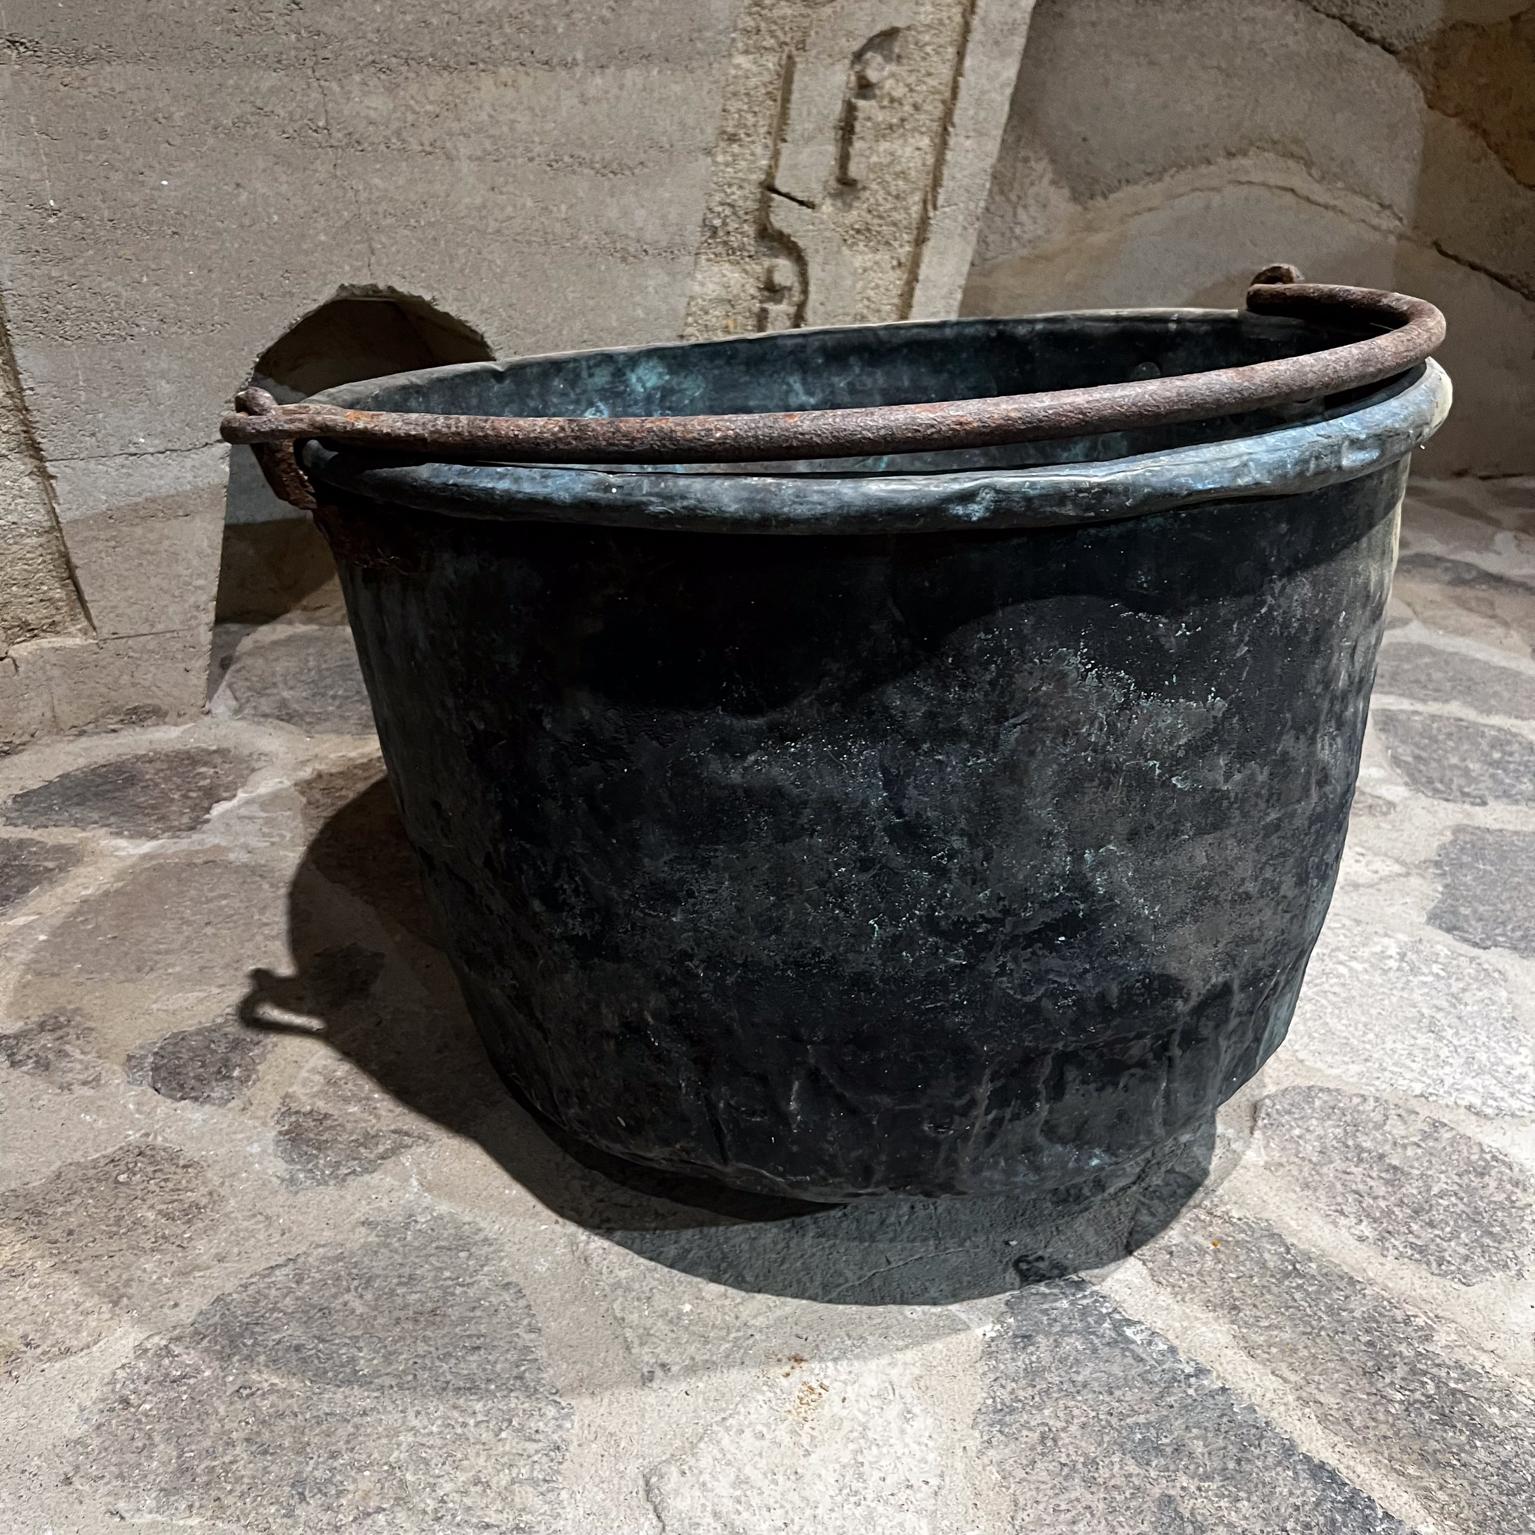 1900s Antique Patinated Copper Cauldron Pot Forged Iron Handle In Fair Condition For Sale In Chula Vista, CA